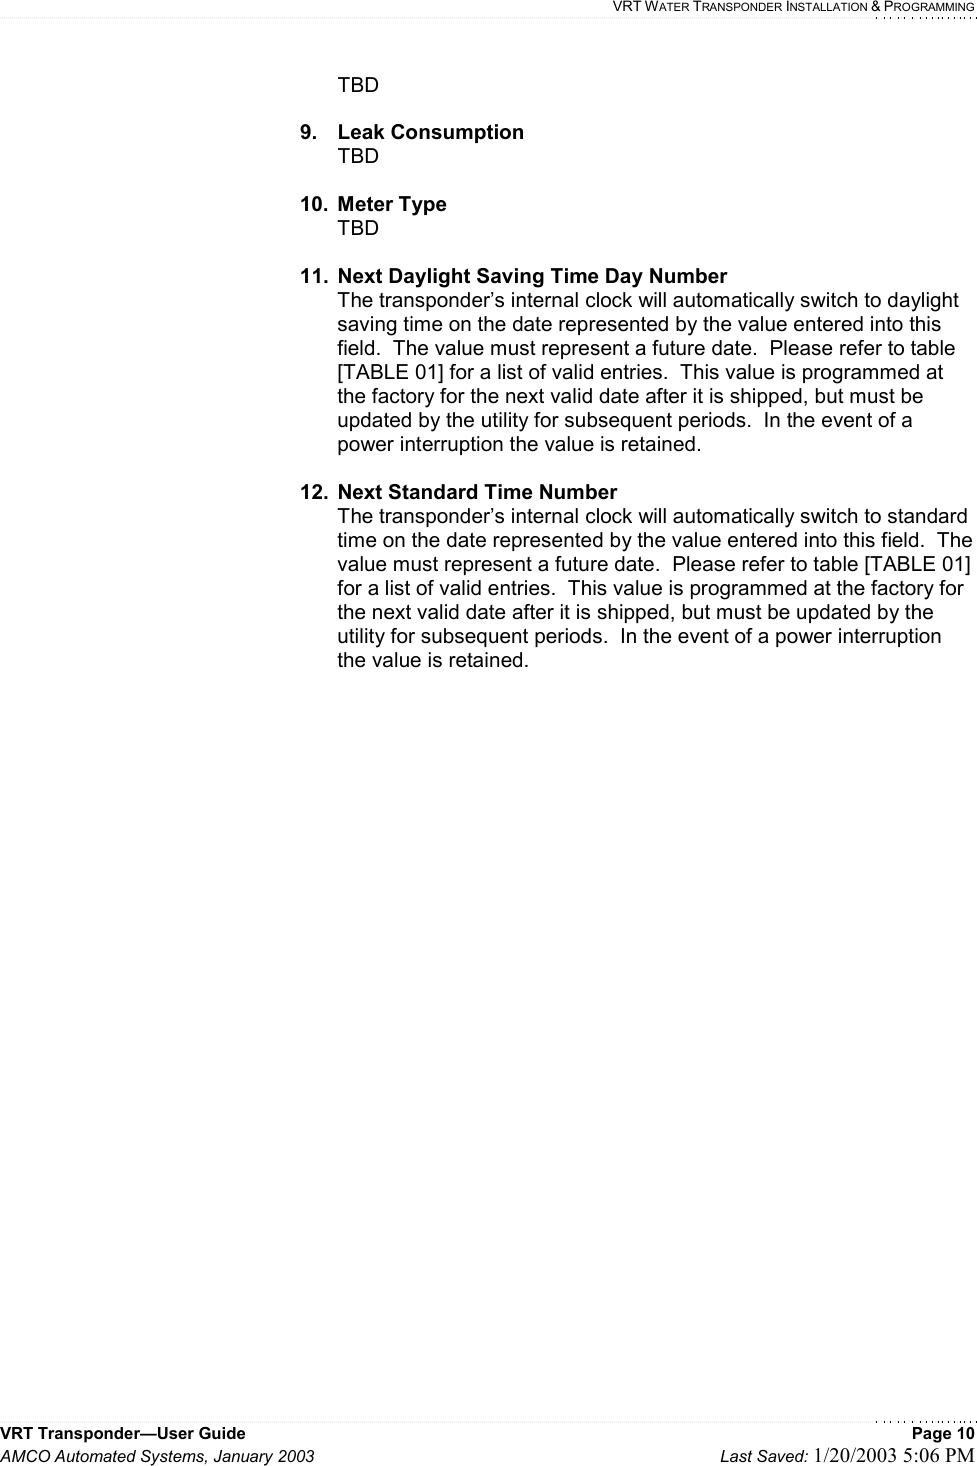    VRT WATER TRANSPONDER INSTALLATION &amp; PROGRAMMING VRT Transponder—User Guide    Page 10 AMCO Automated Systems, January 2003    Last Saved: 1/20/2003 5:06 PM  TBD  9. Leak Consumption TBD  10. Meter Type TBD    11.  Next Daylight Saving Time Day Number  The transponder’s internal clock will automatically switch to daylight saving time on the date represented by the value entered into this field.  The value must represent a future date.  Please refer to table [TABLE 01] for a list of valid entries.  This value is programmed at the factory for the next valid date after it is shipped, but must be updated by the utility for subsequent periods.  In the event of a power interruption the value is retained.  12.  Next Standard Time Number  The transponder’s internal clock will automatically switch to standard time on the date represented by the value entered into this field.  The value must represent a future date.  Please refer to table [TABLE 01] for a list of valid entries.  This value is programmed at the factory for the next valid date after it is shipped, but must be updated by the utility for subsequent periods.  In the event of a power interruption the value is retained.    